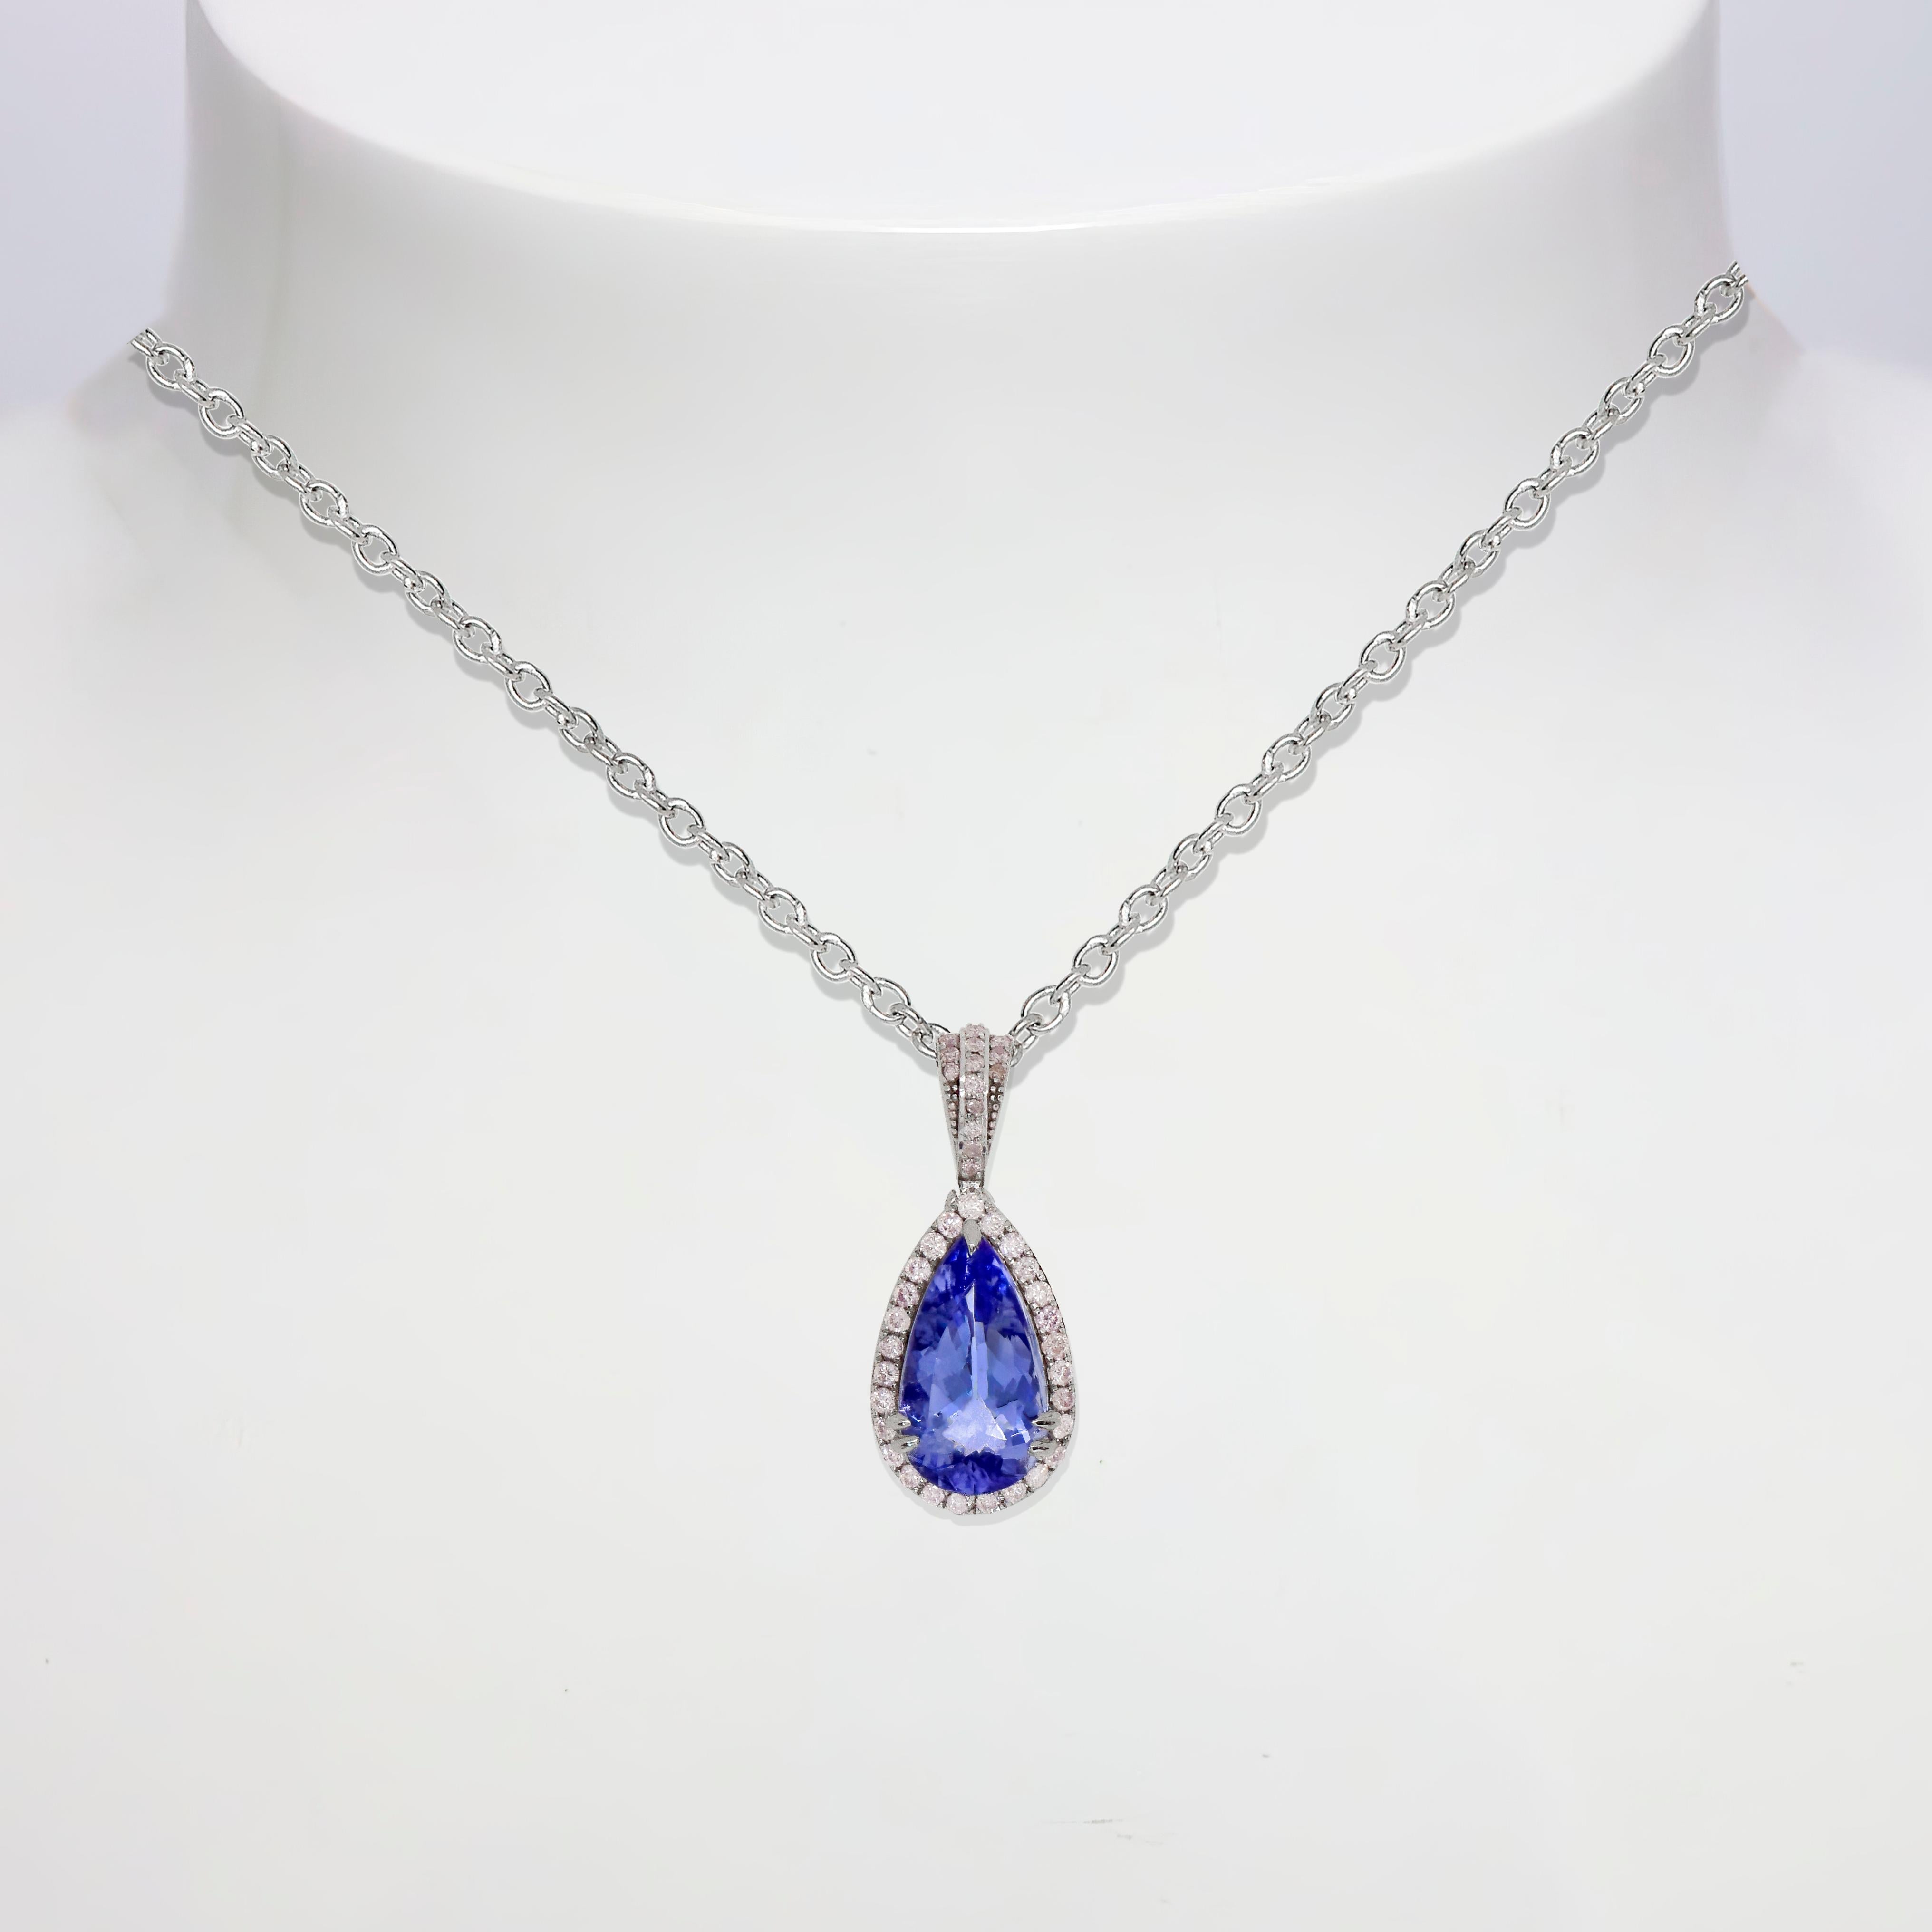 *IGI 14K 2.86 ct Tanzanite&Pink Diamond Antique Pendant Necklace*
The natural bluish violet tanzanite, weighing 2.86 ct, is the center stone surrounded by natural pink diamonds weighing 0.26 ct on the 14K white gold halo design band.

The classic